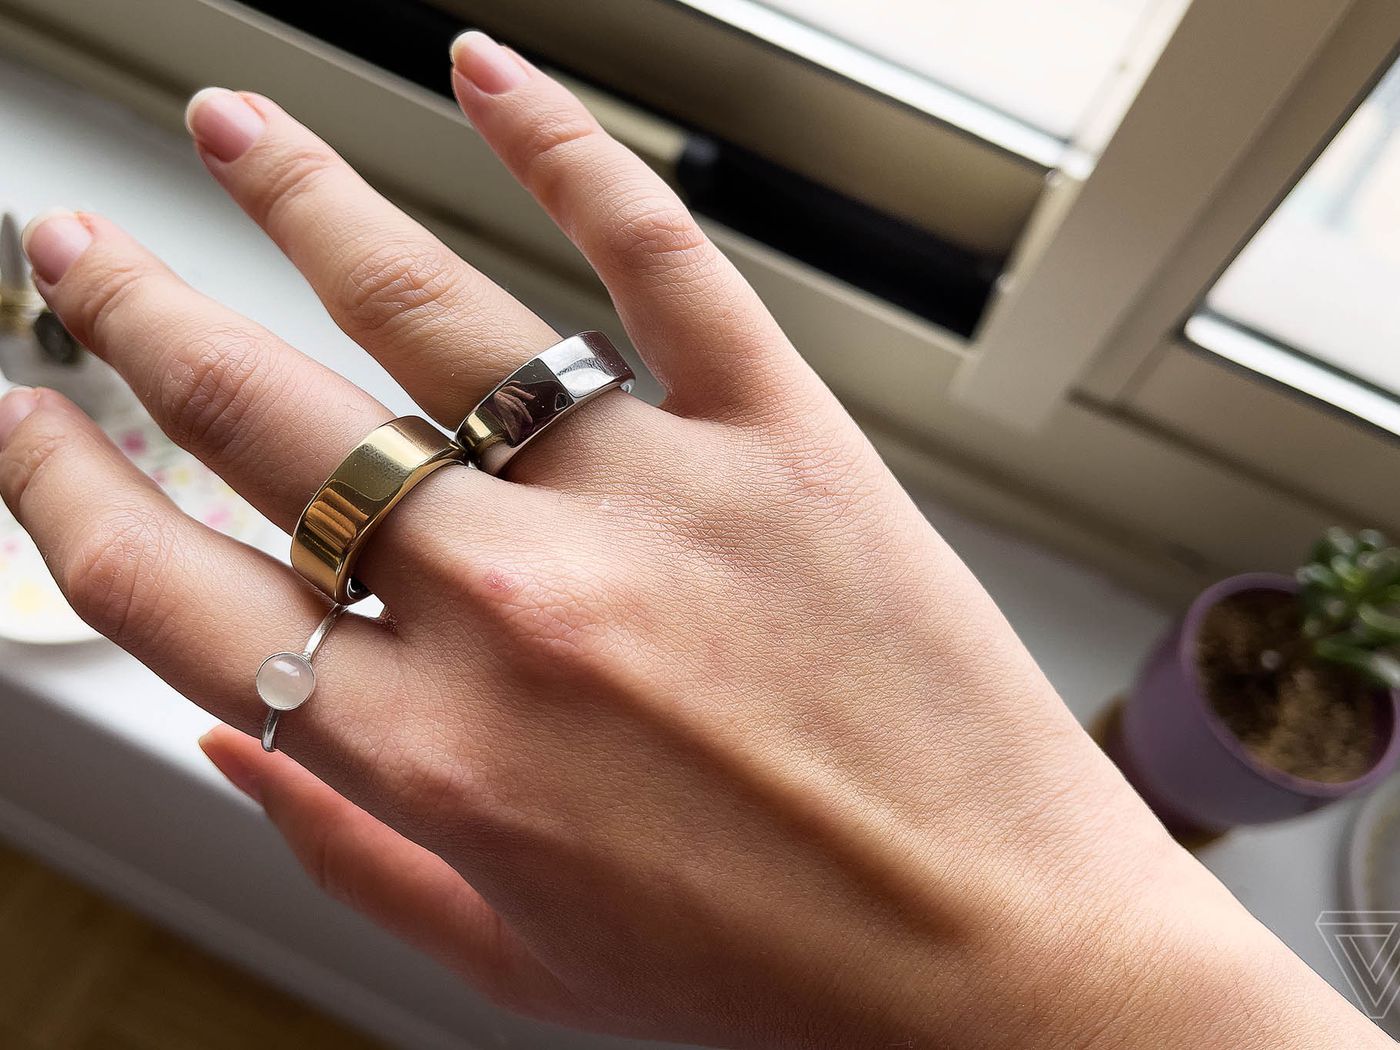 kanal Endeløs kontakt Smart rings have a long way to go - The Verge